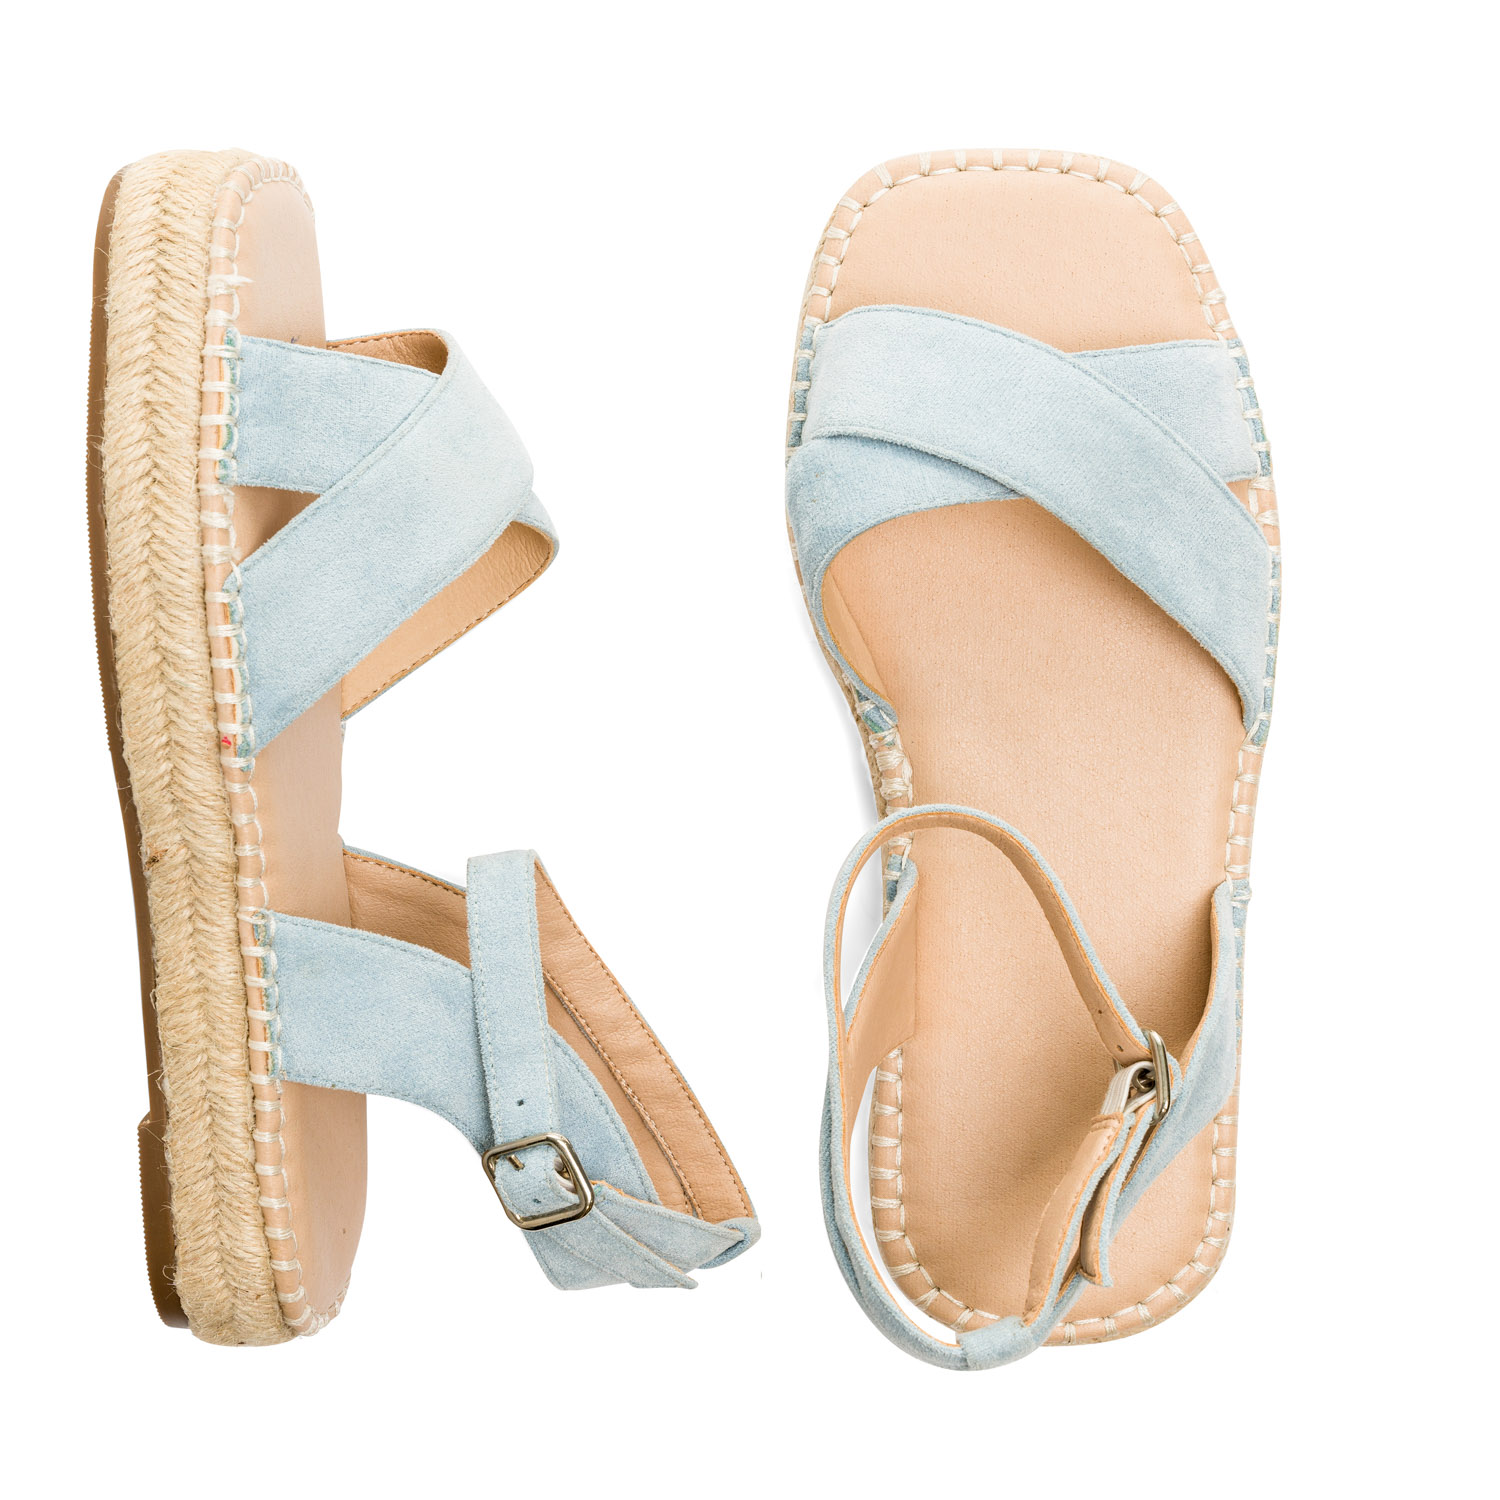 Light blue faux suede sandals with jute wedge 